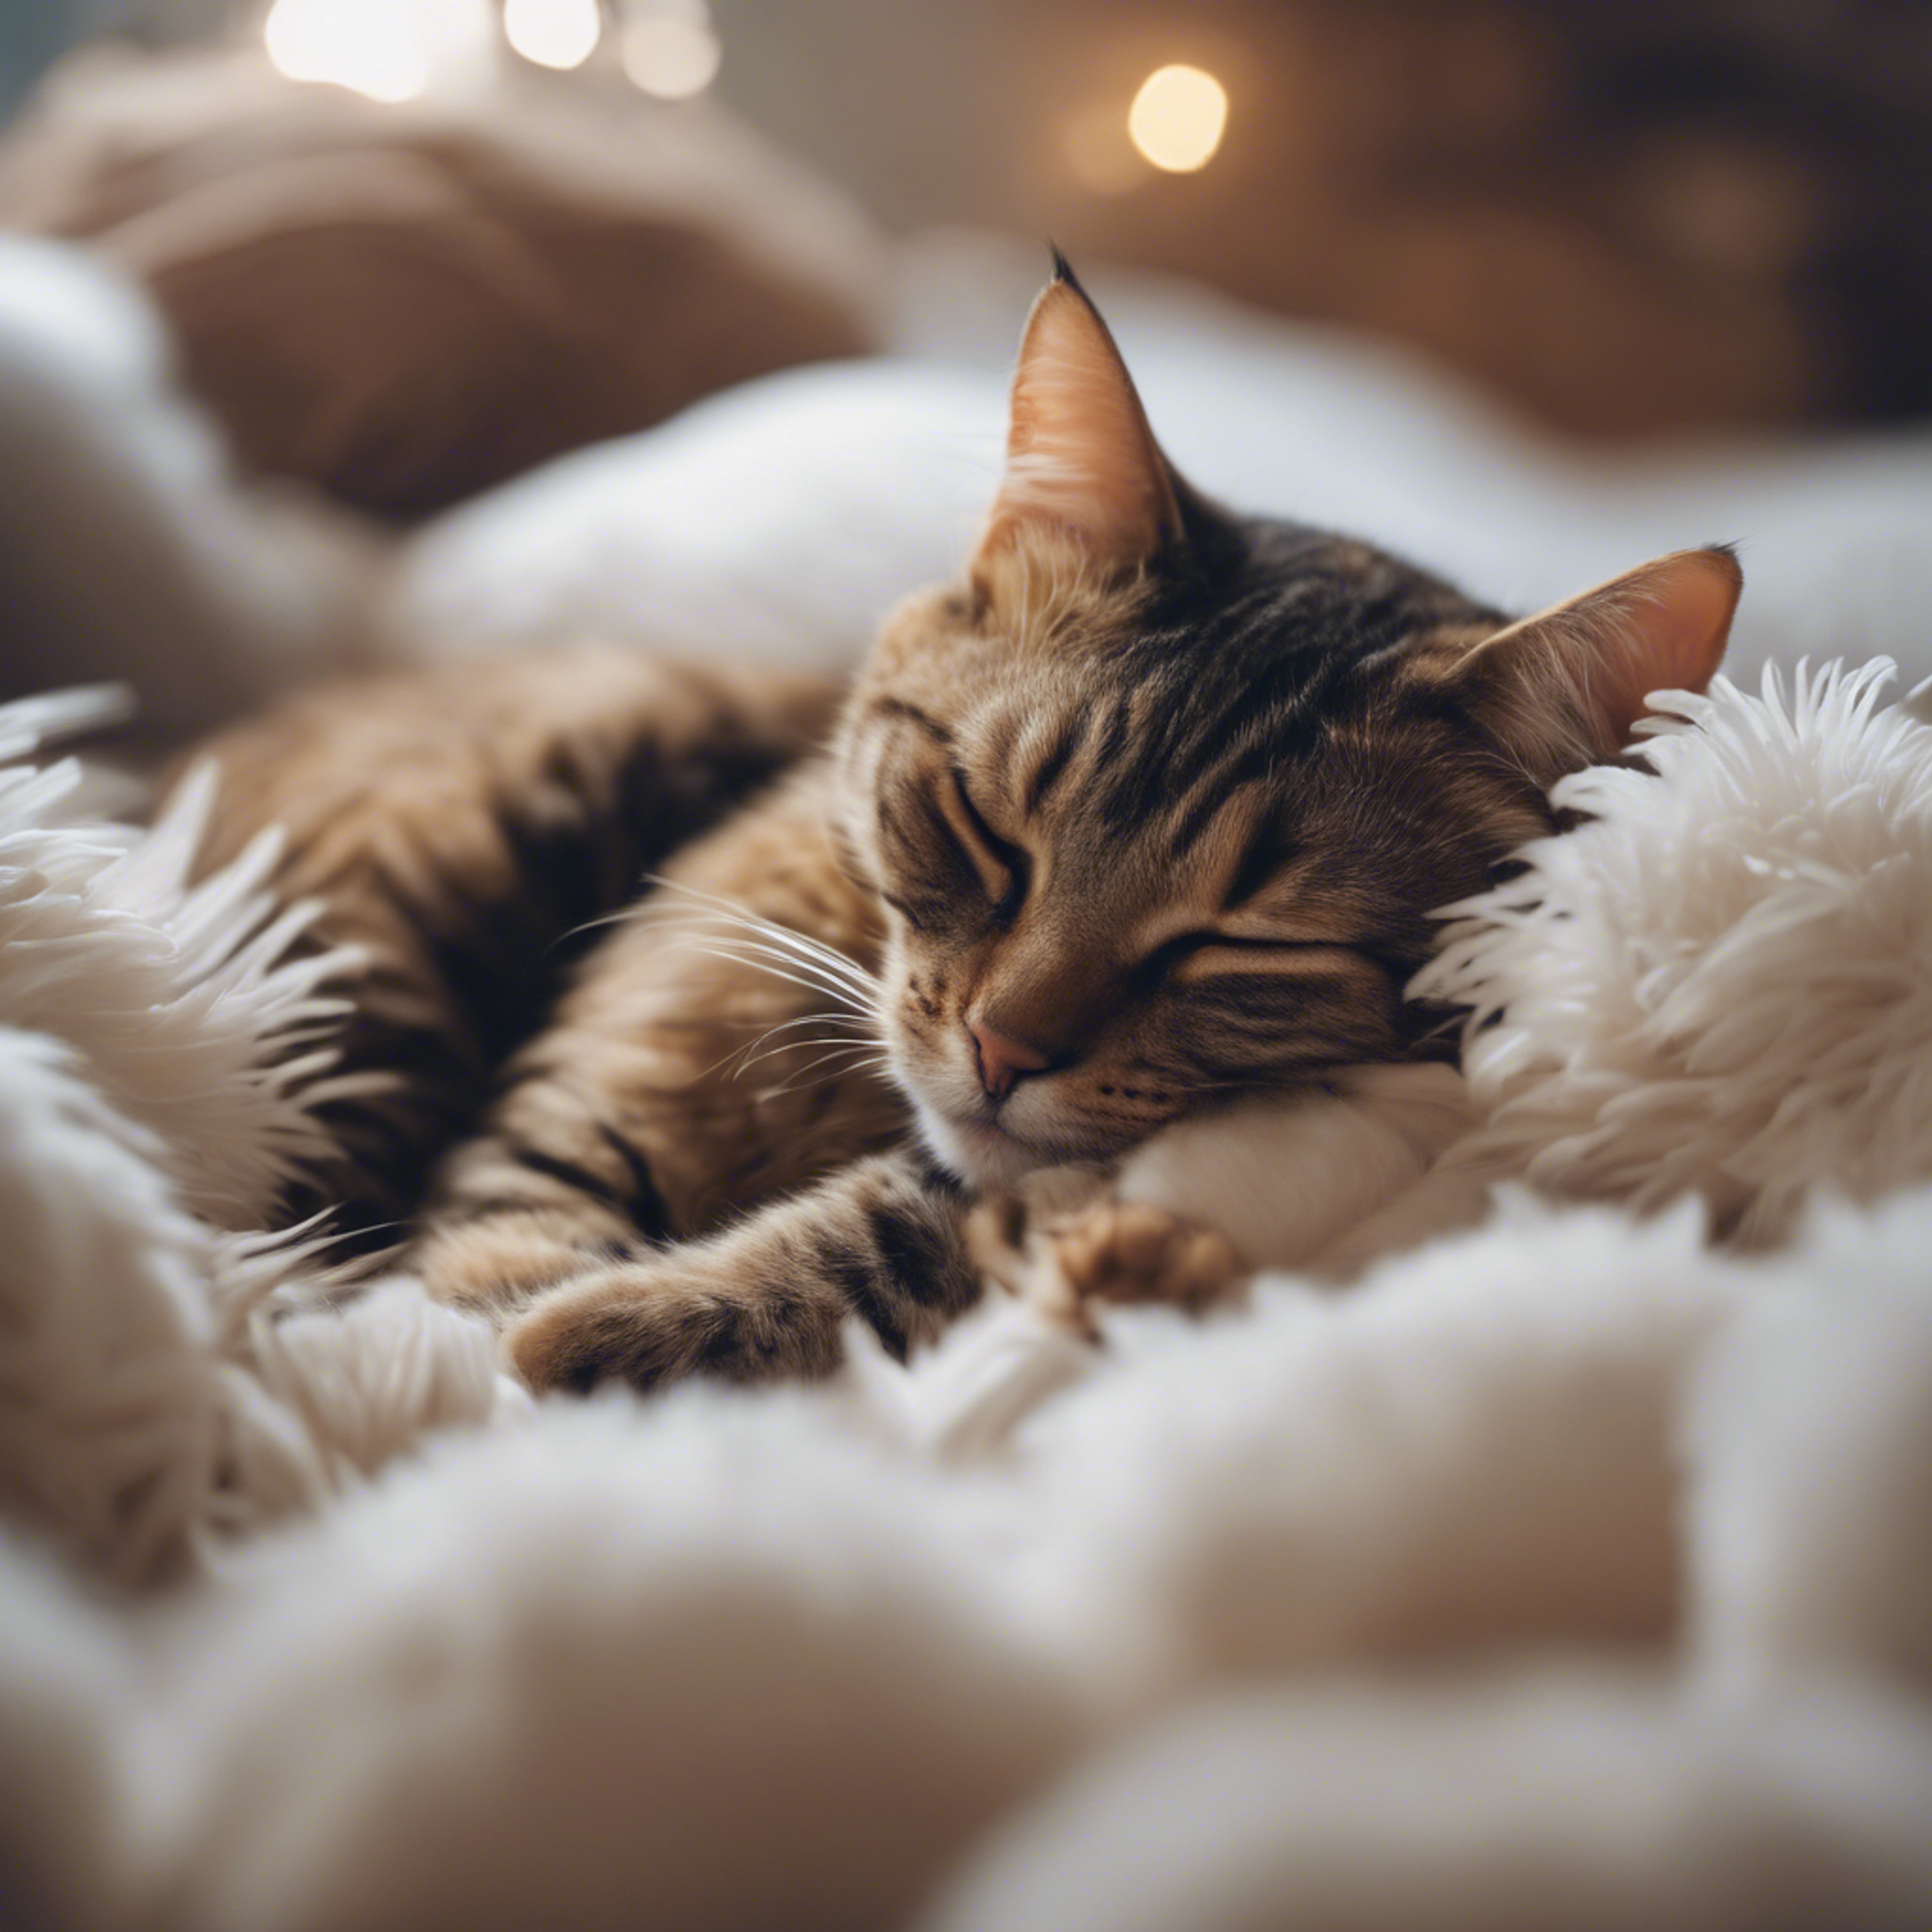 A cat sleeping soundly, completely submerged in a sea of cozy, fluffy pillows.壁紙[9e78fe4df88a4e90bb06]